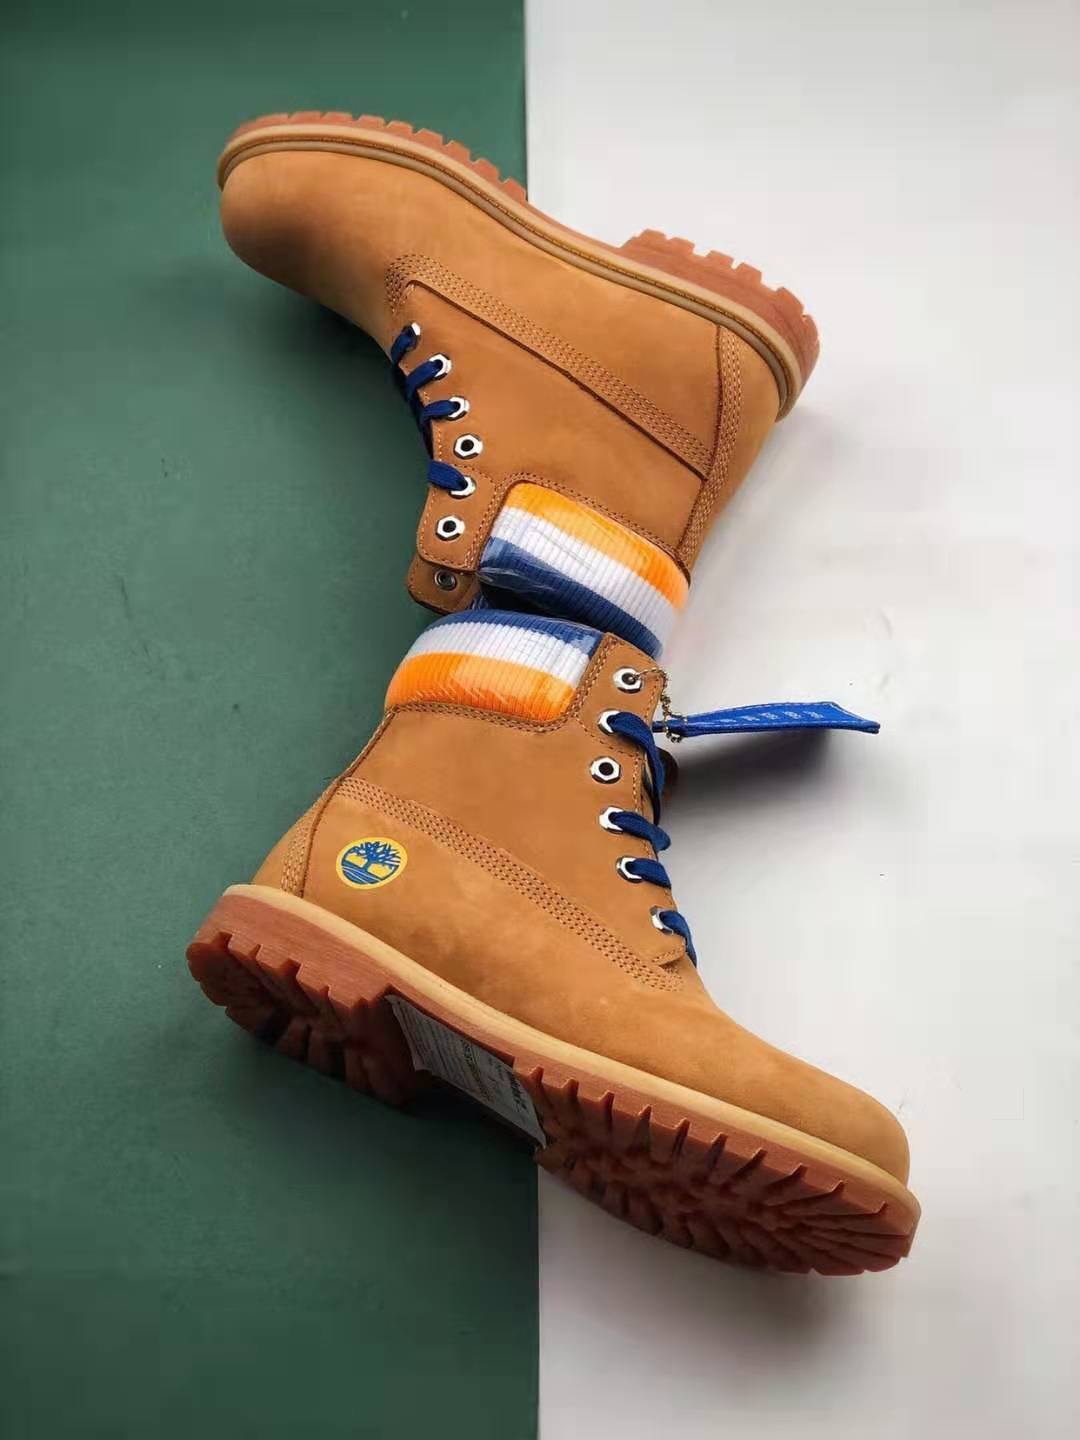 Timberland Mitchell & Ness x NBA x 6 Inch Premium Junior 'Golden State Warriors' TB0A1UDQ 231 - Shop Now for Exclusive Warriors Edition!